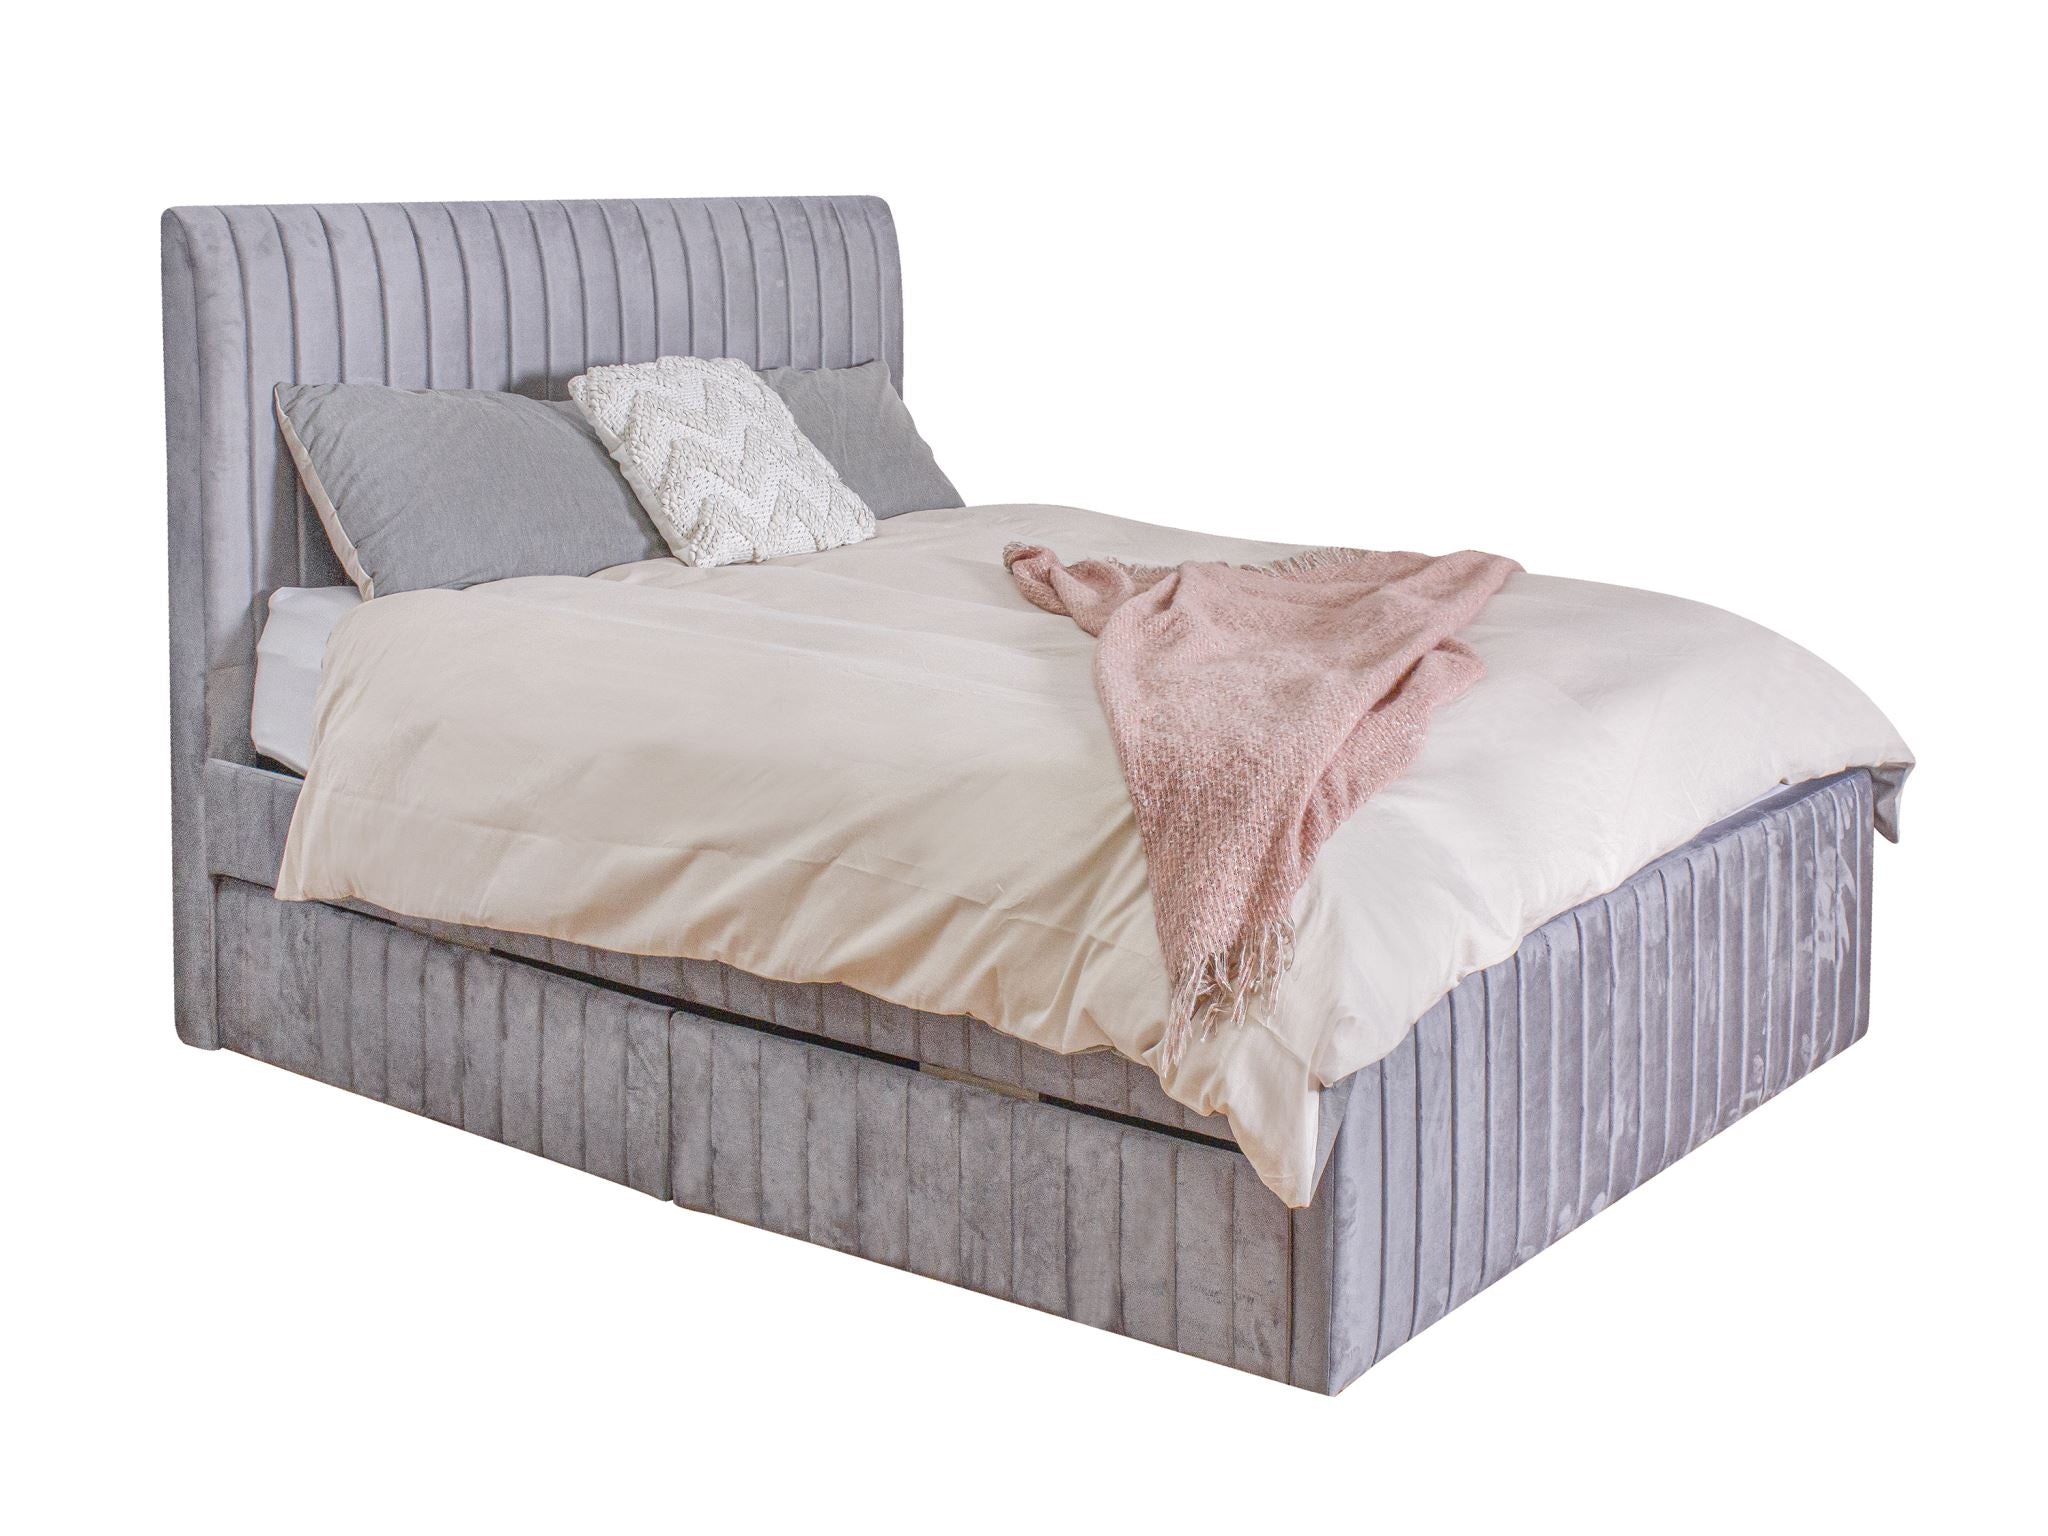 T Wairoa Fabric Bed Frame Queen With Drawers